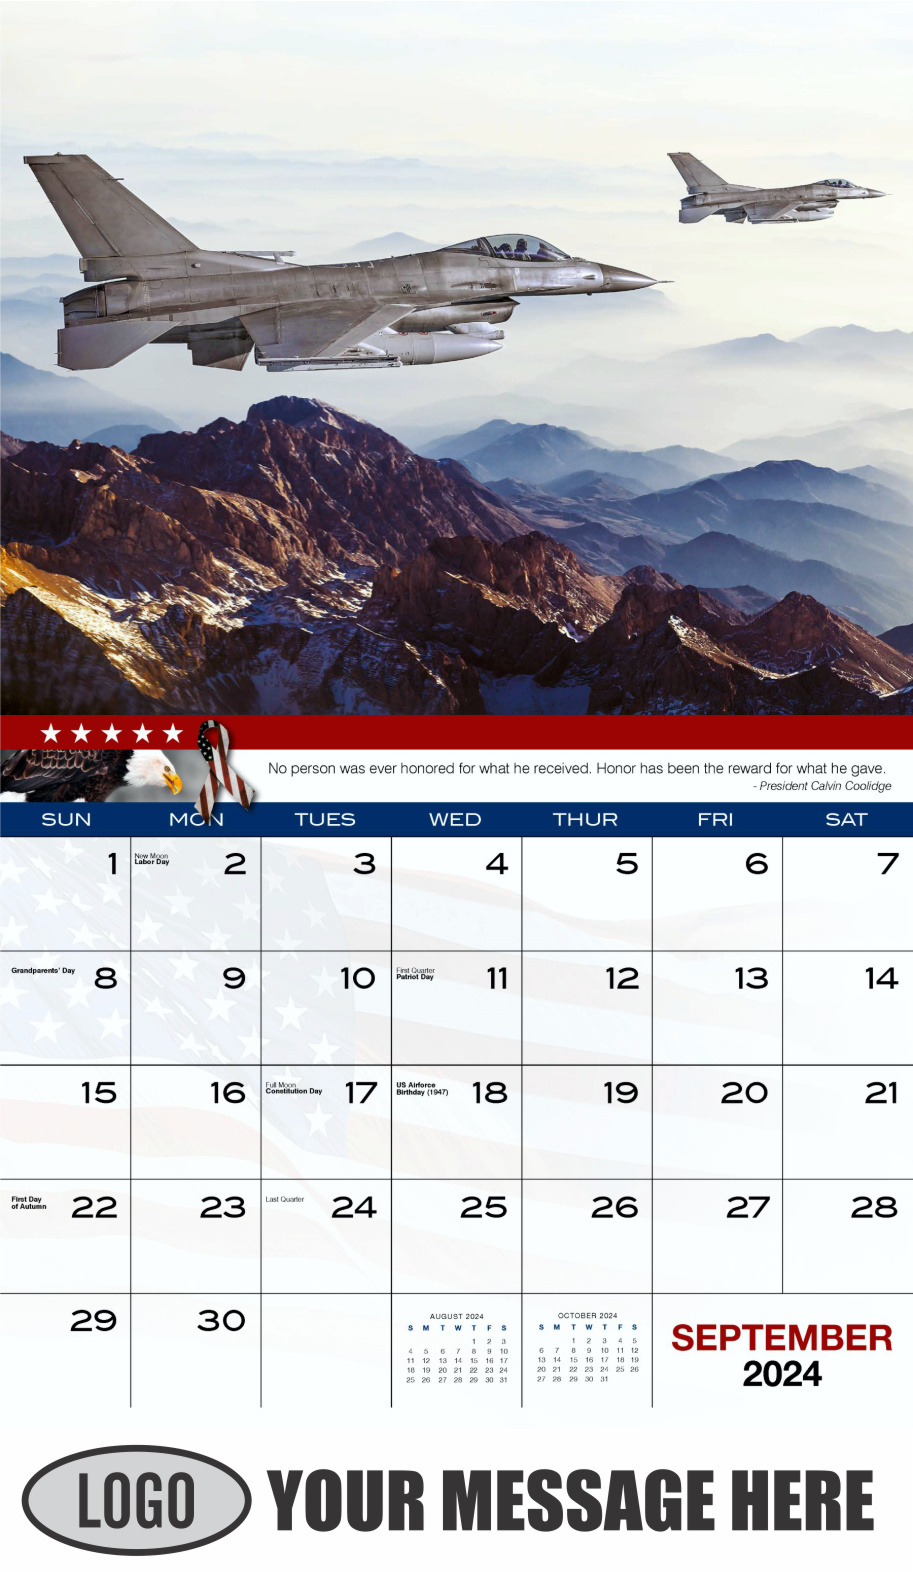 Home of the Brave 2024 USA Armed Forces Business Promo Calendar - September